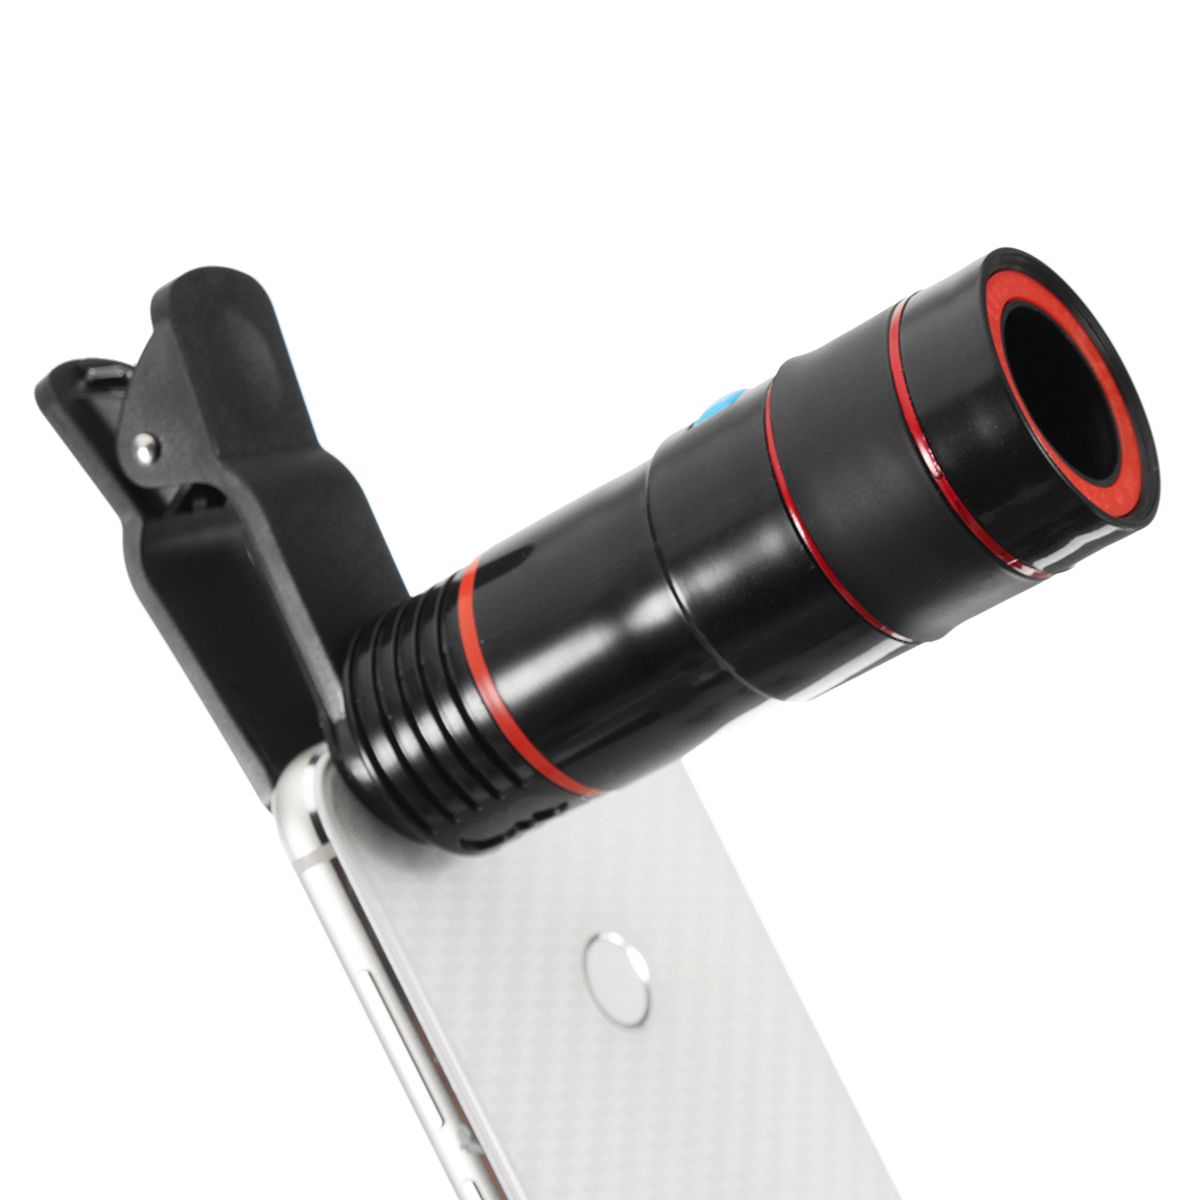 Universal 8X-12X Zoom Telescope Clip-on Camera Lens for Smartphone Tablets